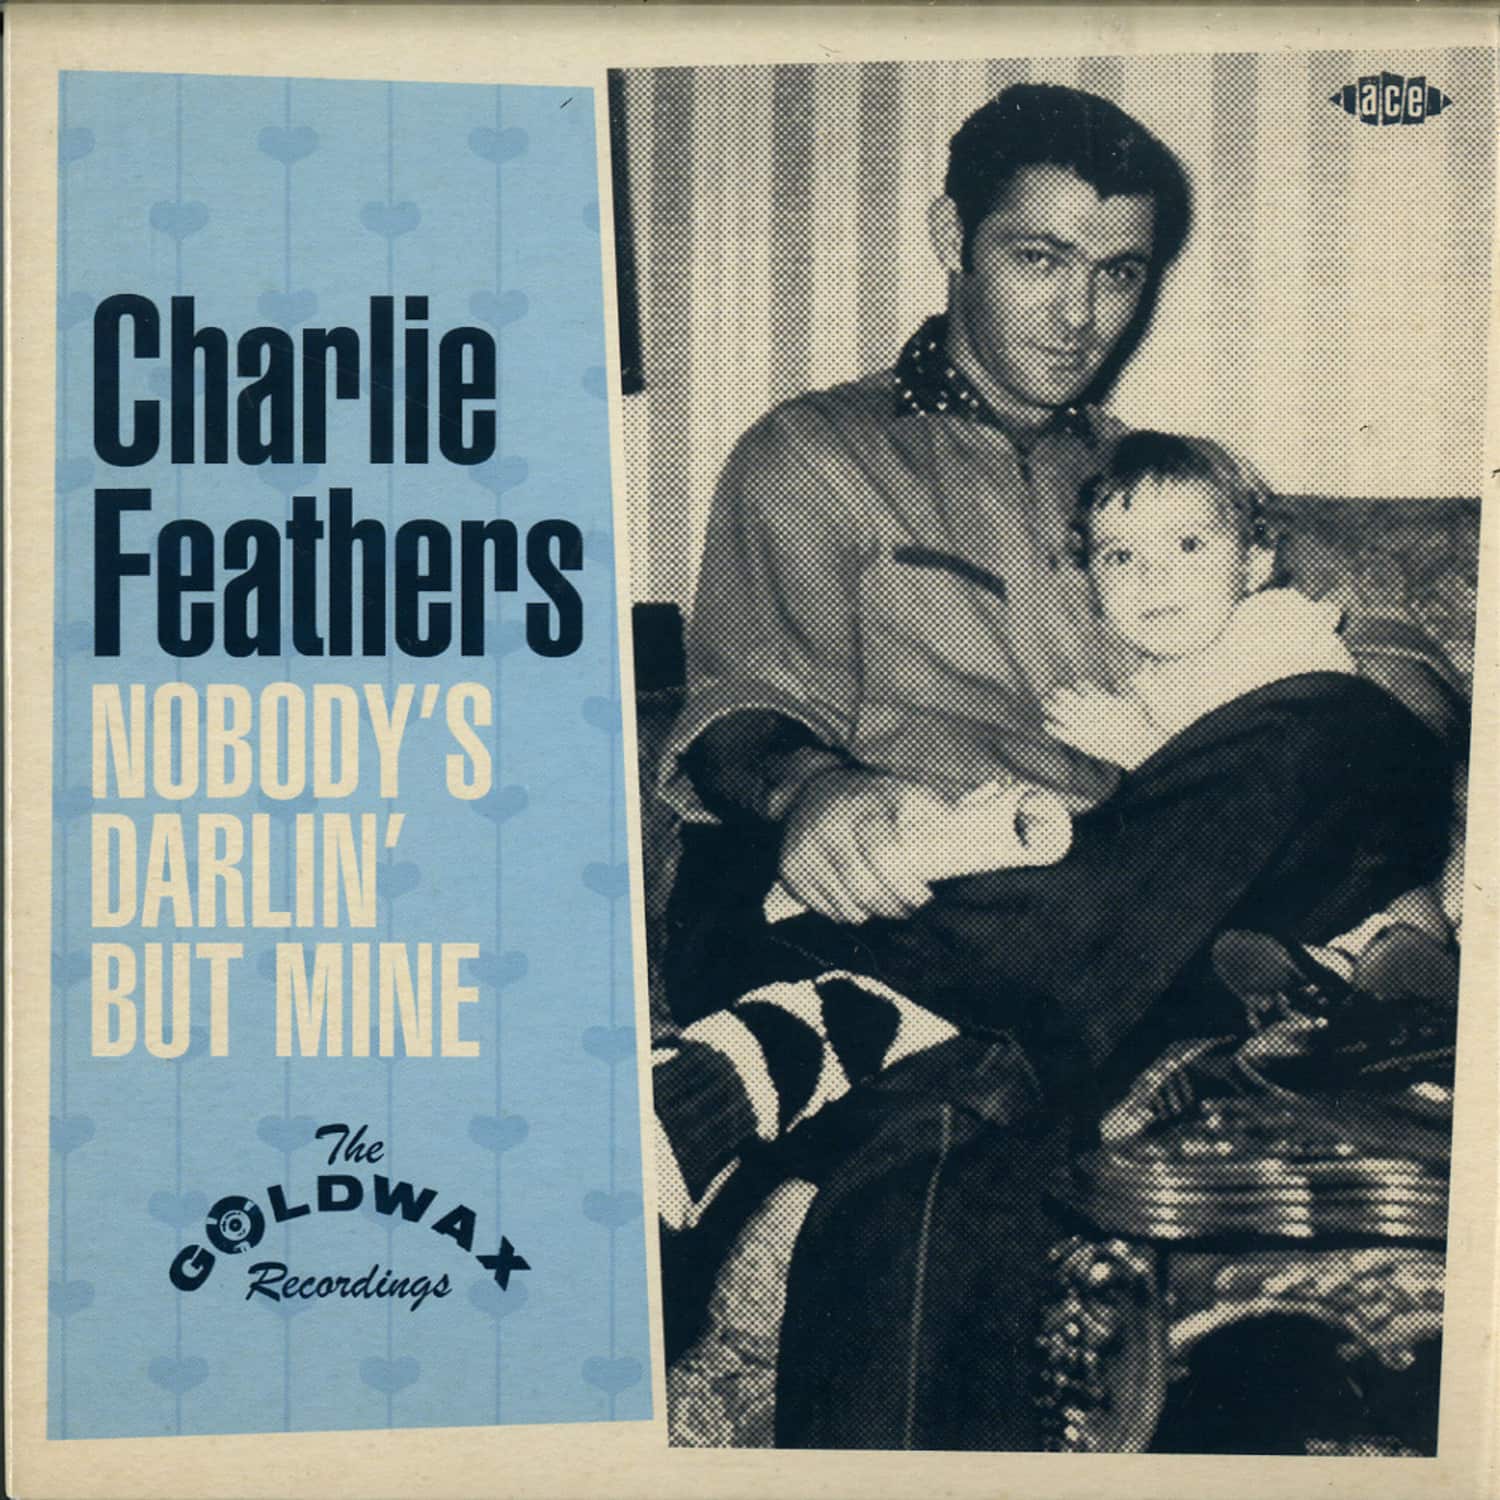 Charlie Feathers - NOBODYS DARLIN BUT MINE 